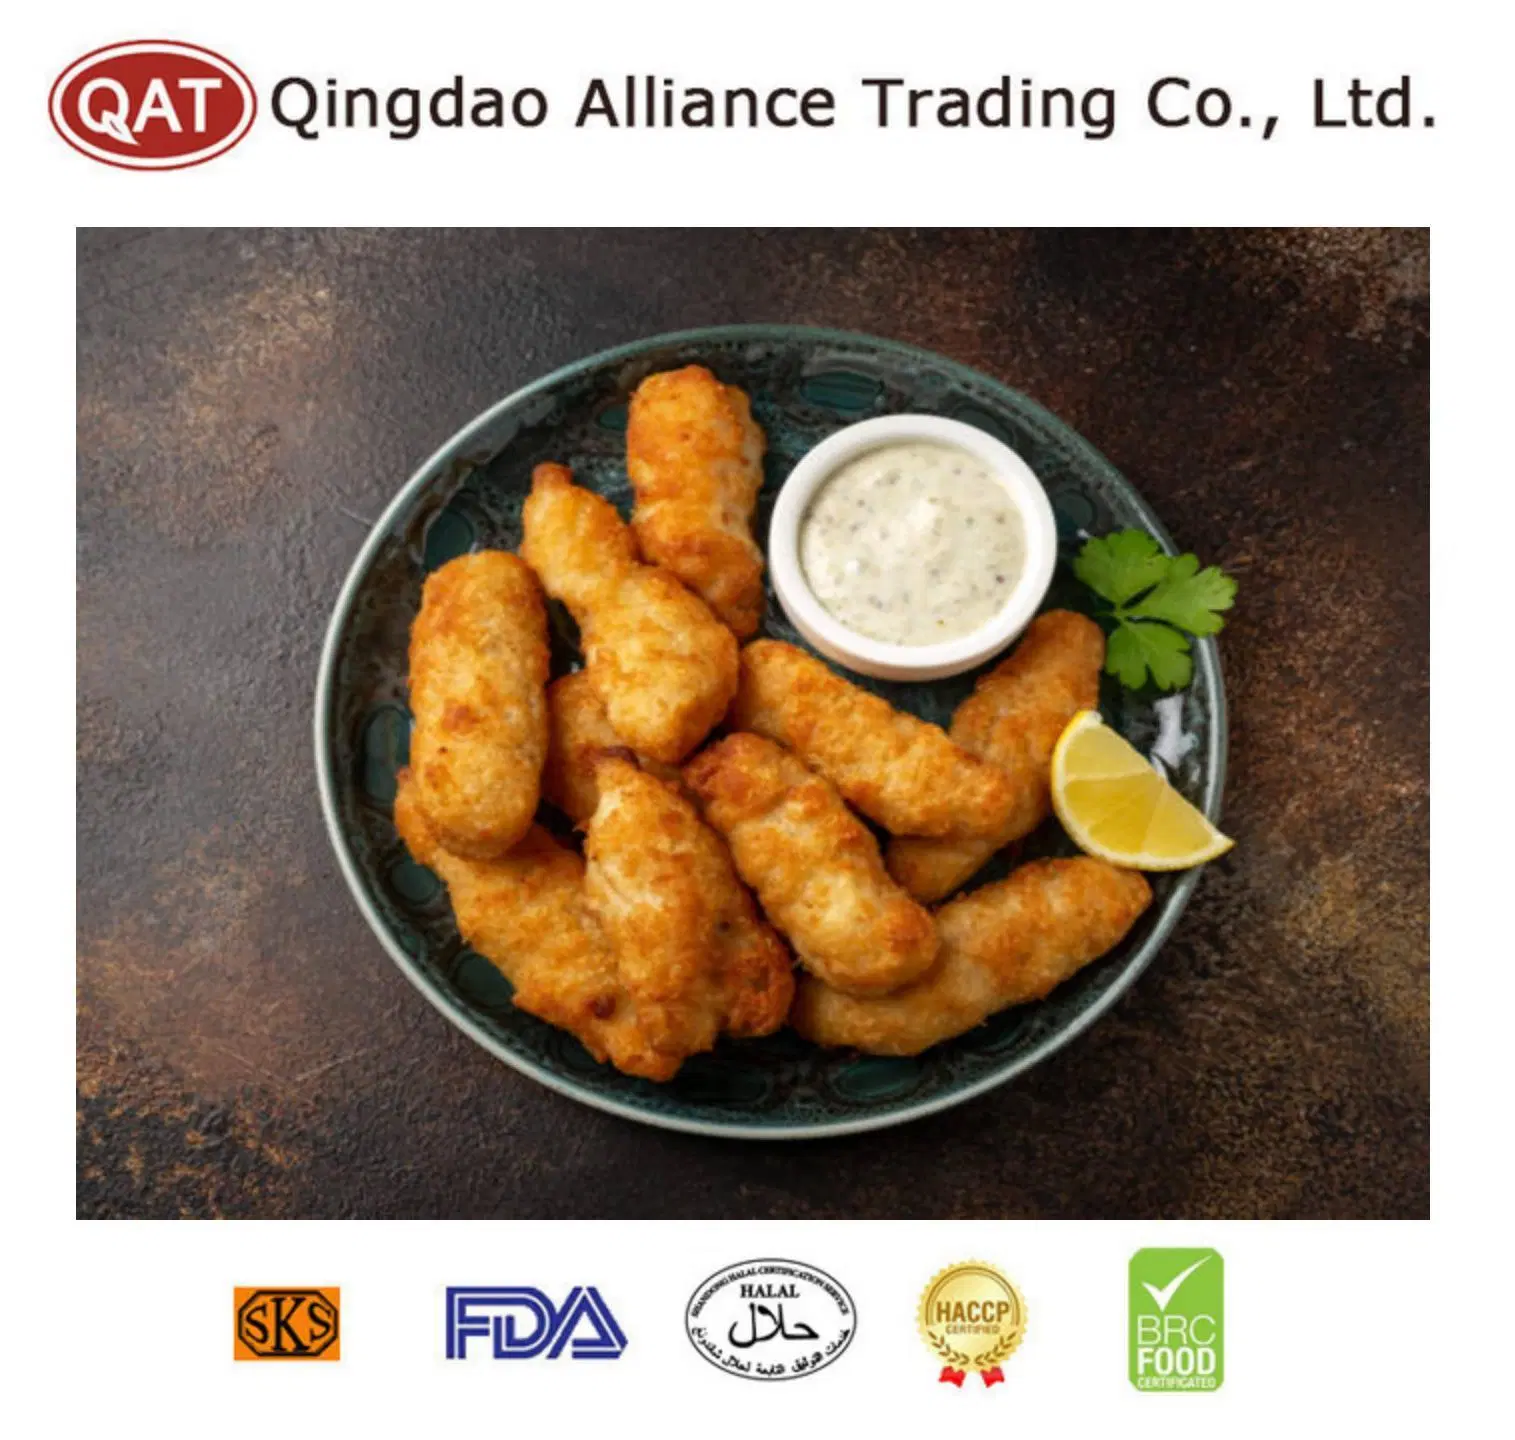 Top Quality IQF Halal Frozen Original Chicken Breast Strips with Certificate